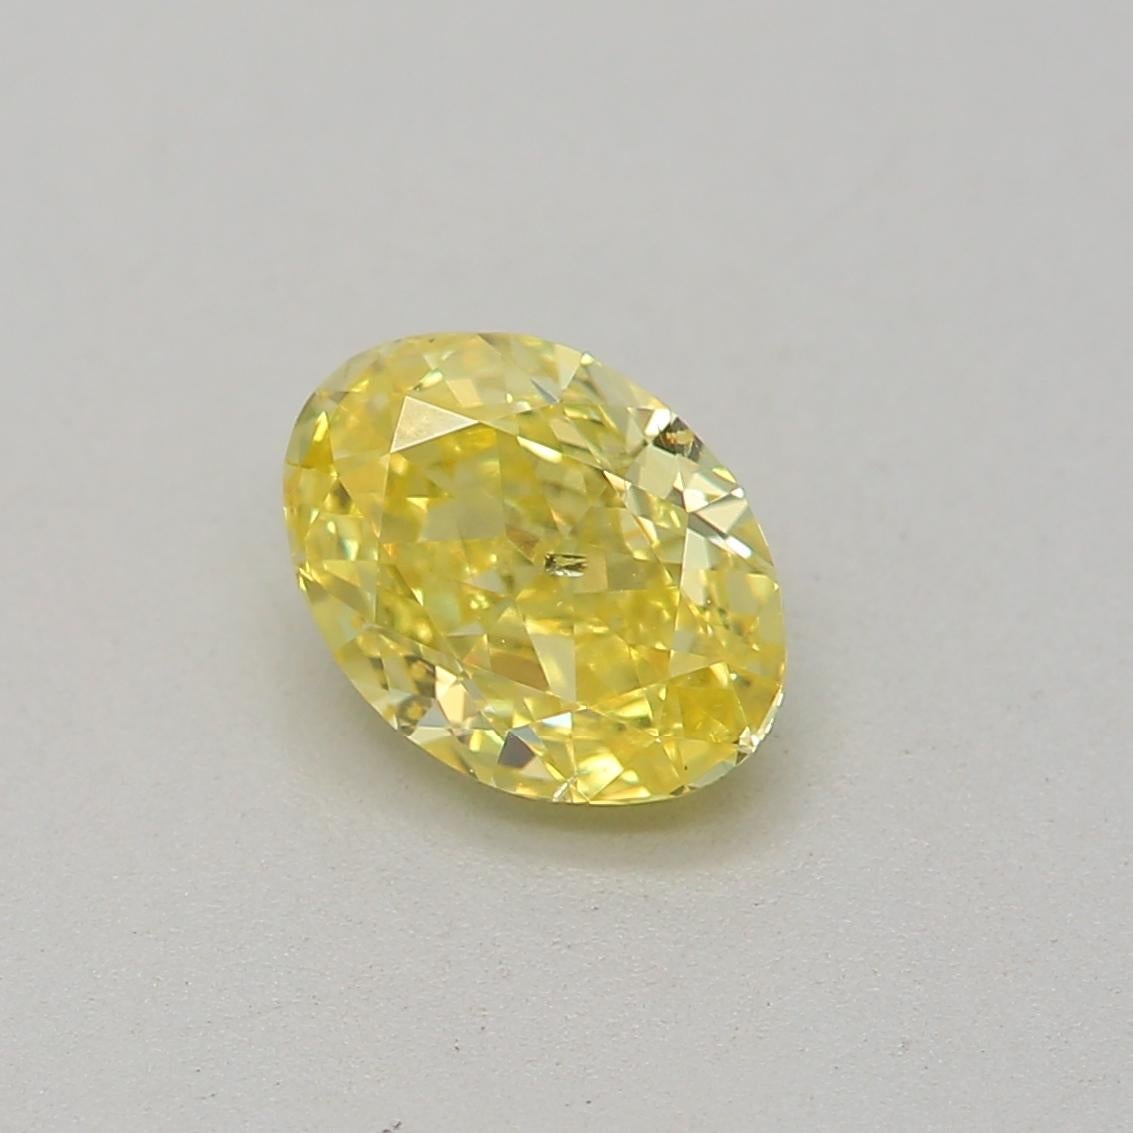 *100% NATURAL FANCY COLOUR DIAMOND*

✪ Diamond Details ✪

➛ Shape: Oval
➛ Colour Grade: Fancy Intense Yellow
➛ Carat: 0.53
➛ Clarity: SI2
➛ GIA Certified 

^FEATURES OF THE DIAMOND^

This 0.53 carat diamond is a relatively small diamond, with carat